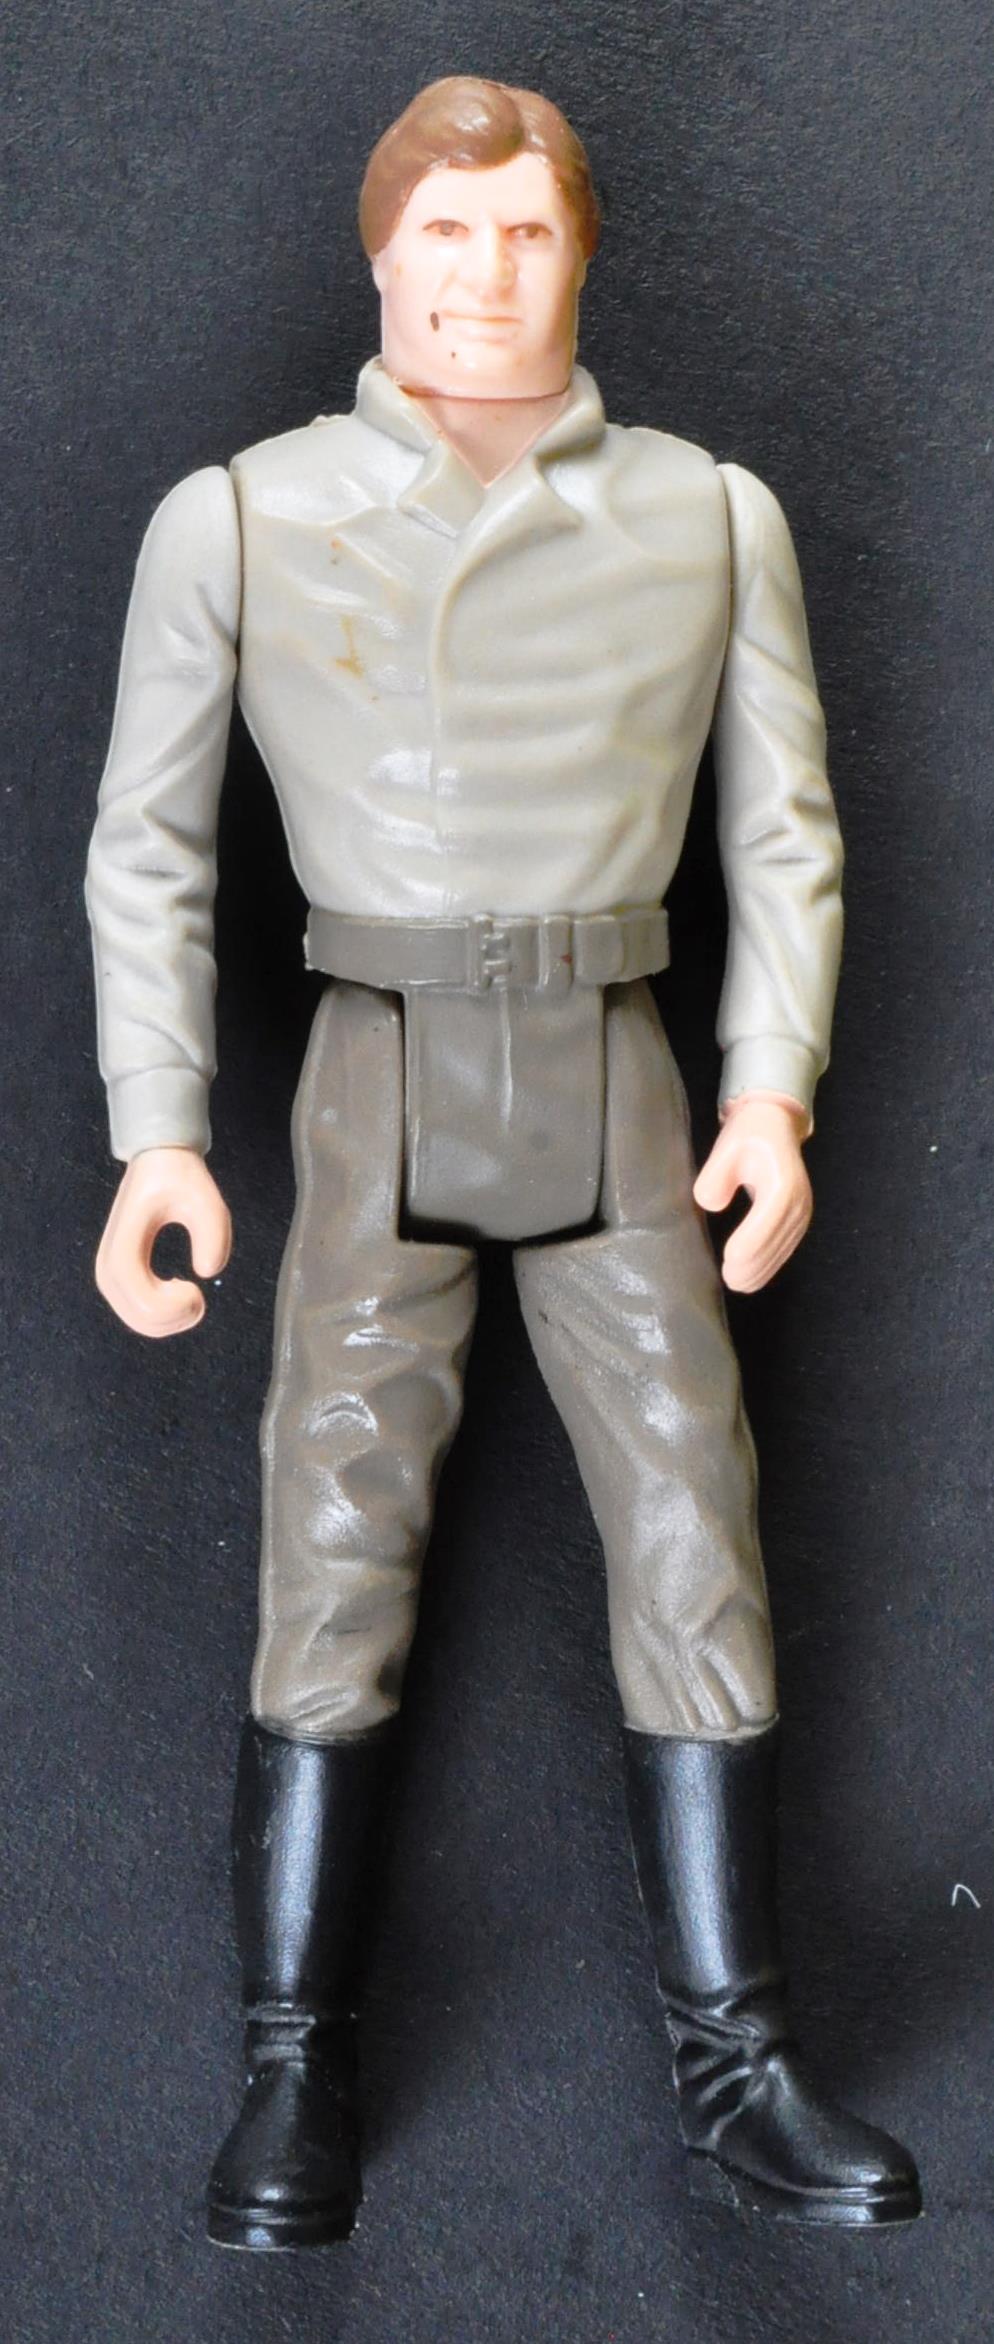 STAR WARS - LAST 17 HAN SOLO IN CARBONITE CHAMBER FIGURE - Image 2 of 5